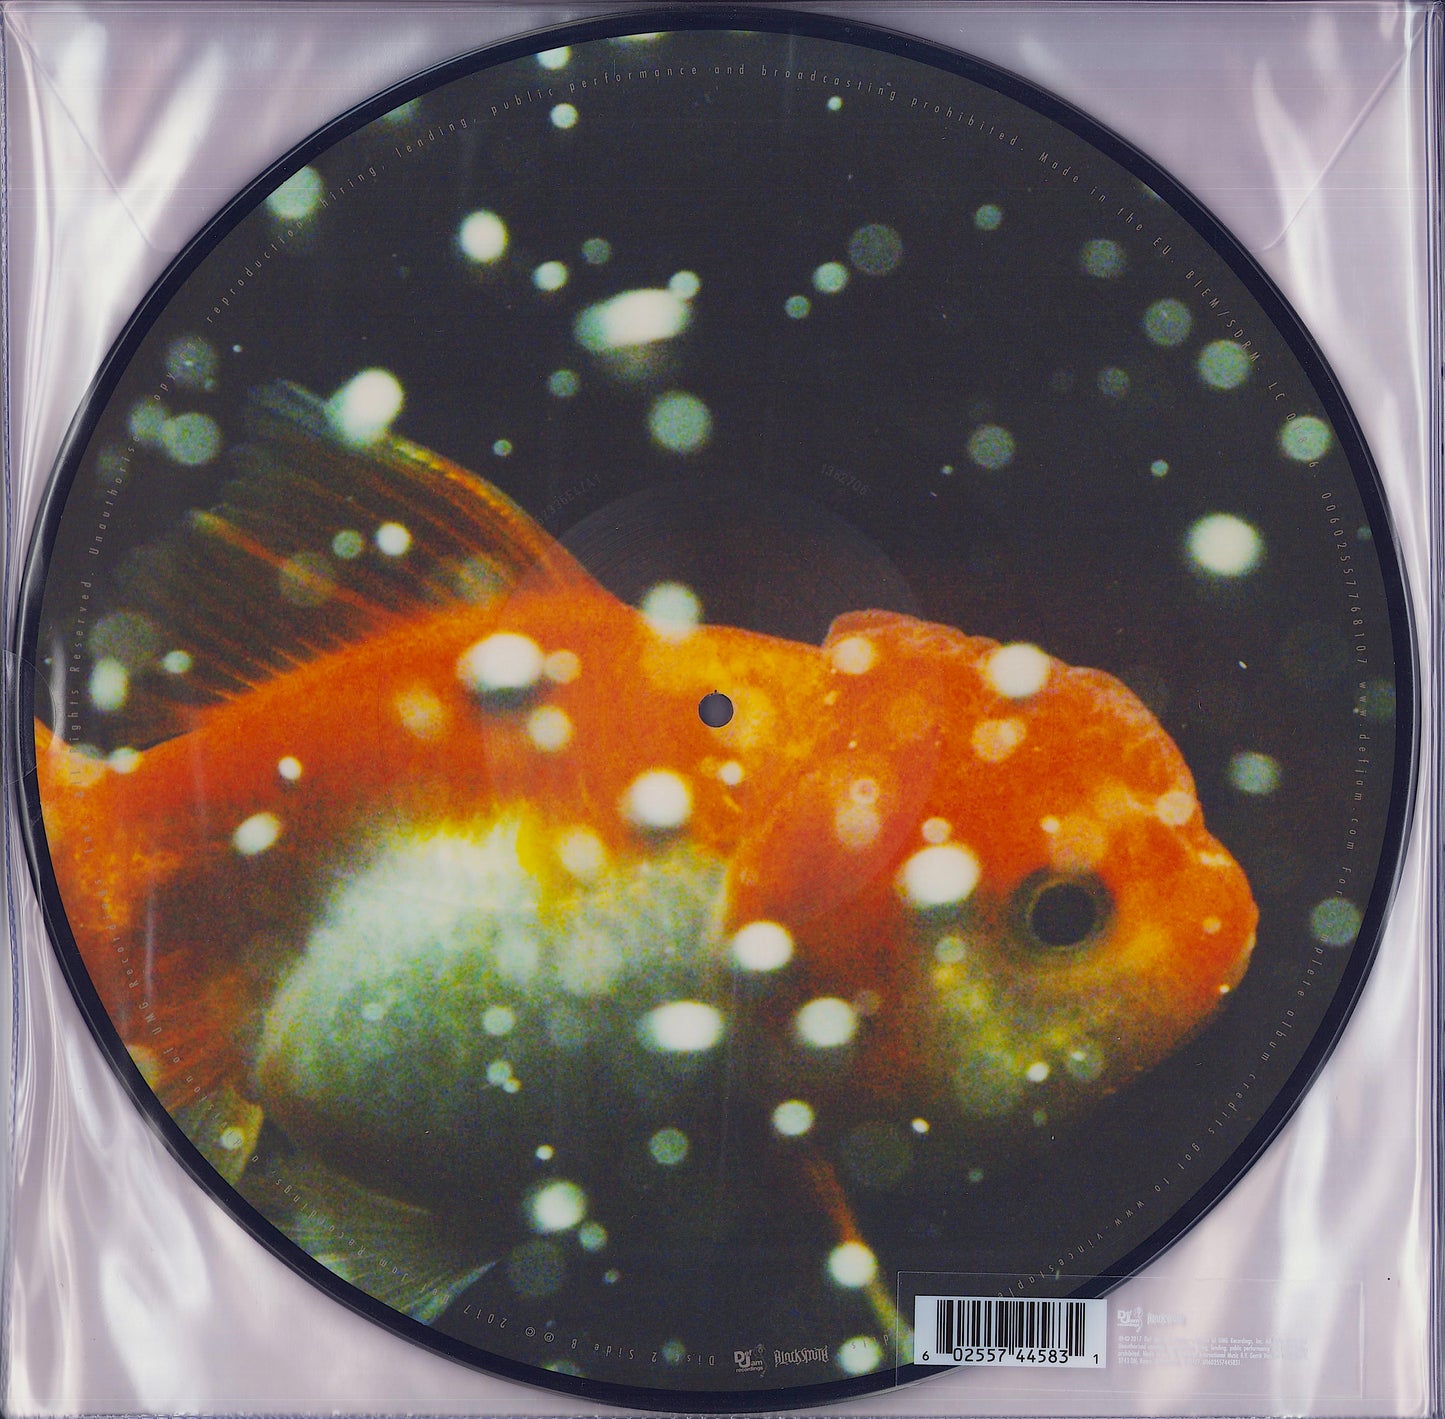 Vince Staples ‎- Big Fish Theory Picture Disc Vinyl 2LP Limited Edition